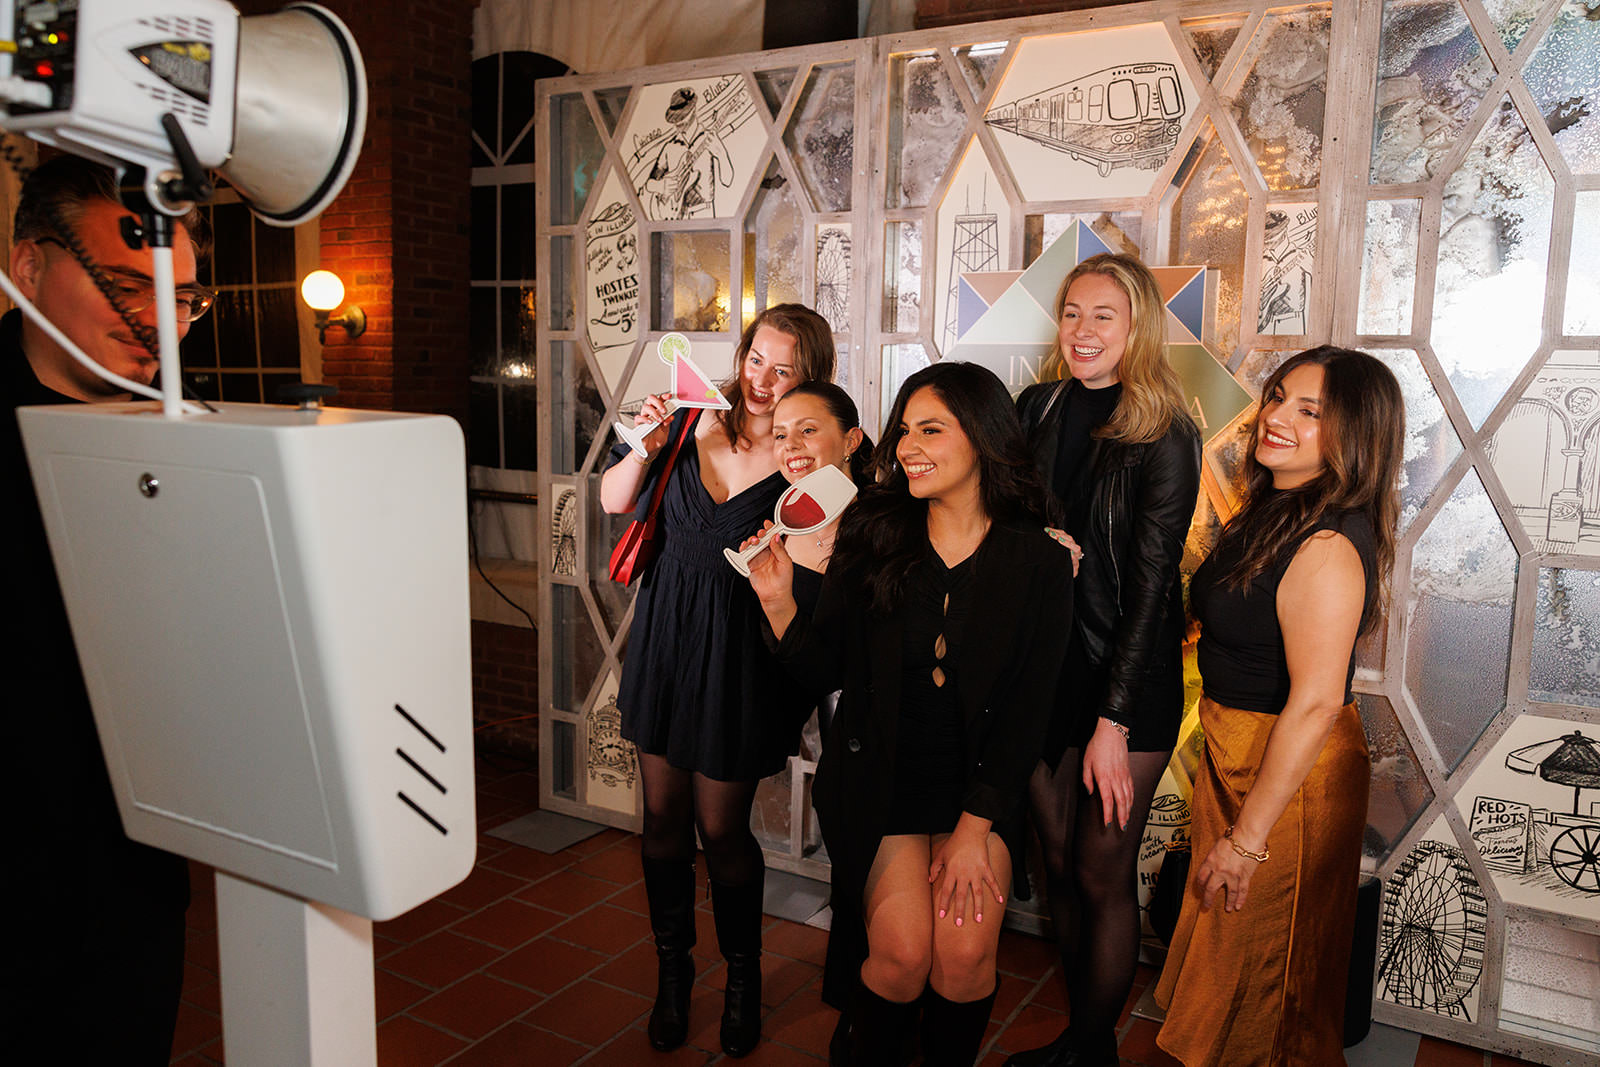 Chicago Party Event with Modern Photo Booth Company - Shutterbox Entertainment